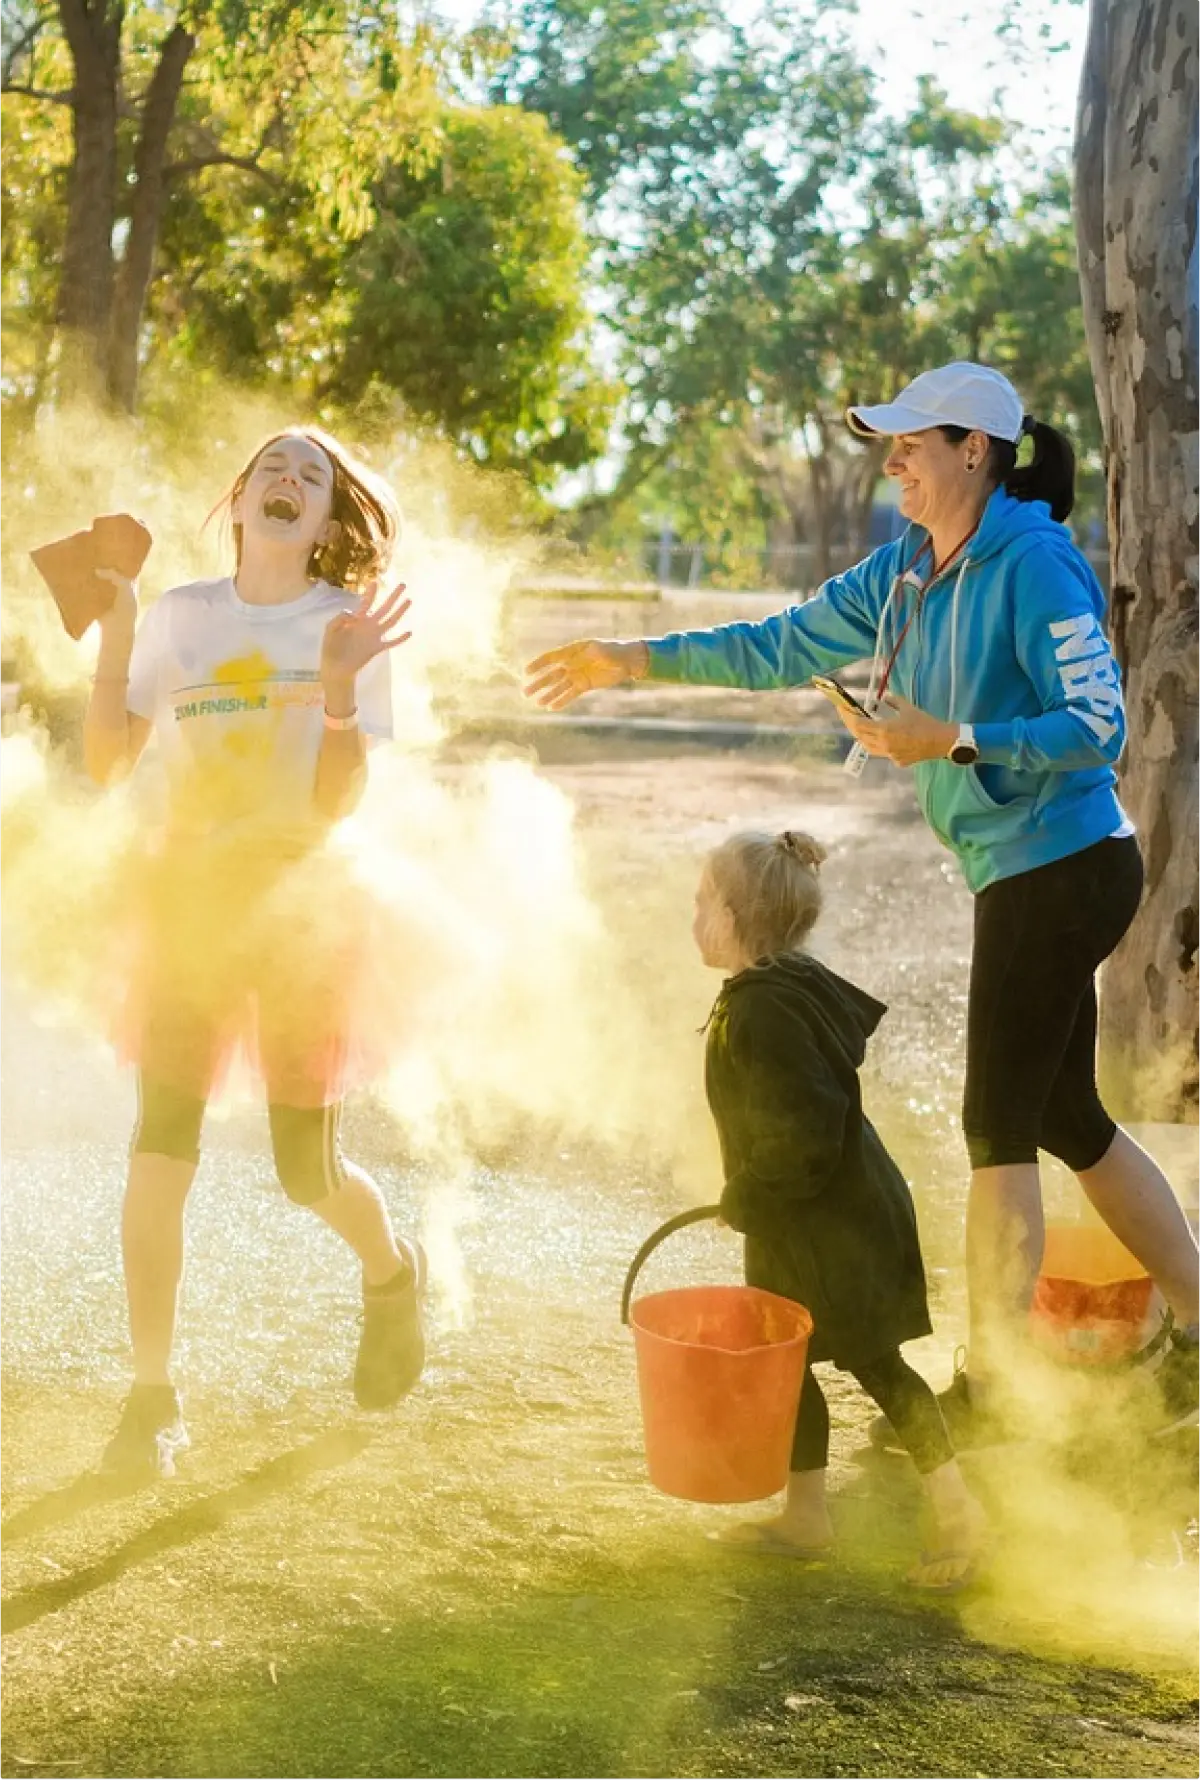 Children and an adult having fun during a color run event, with yellow powder being thrown in the air, creating a vibrant cloud.